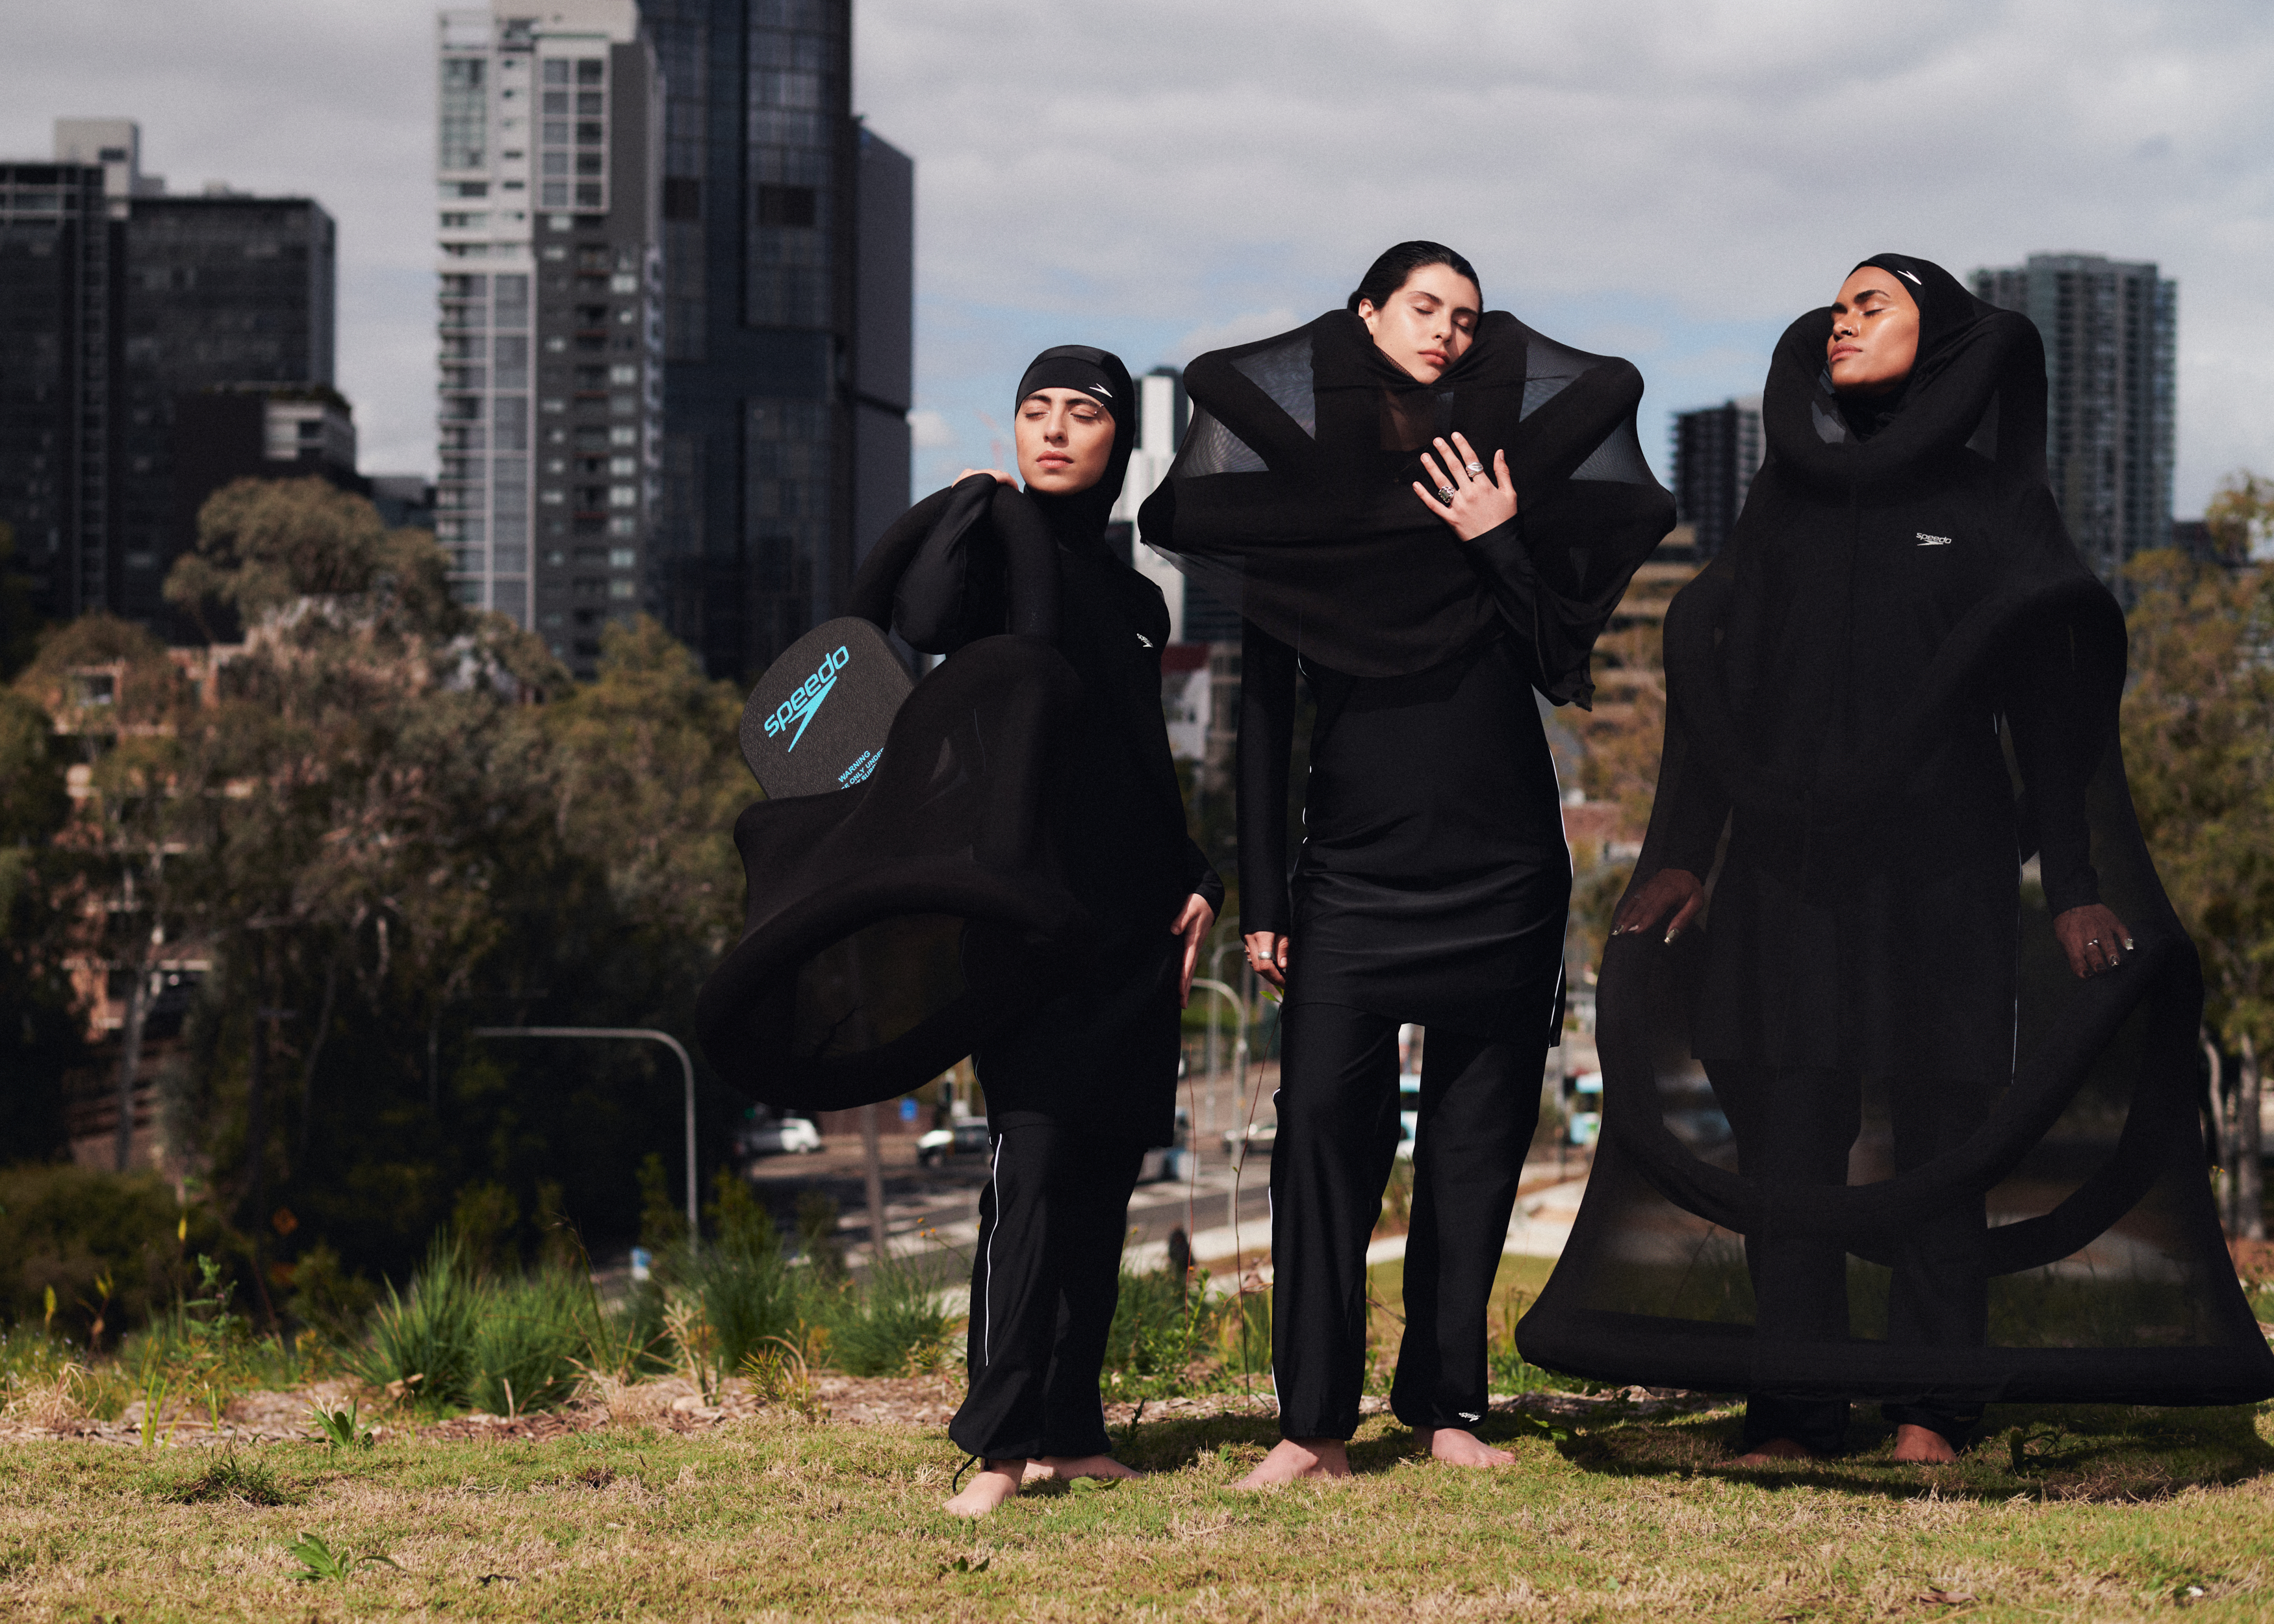 A group of hijabi models in black clothing on top of a hill framed by a city skyline